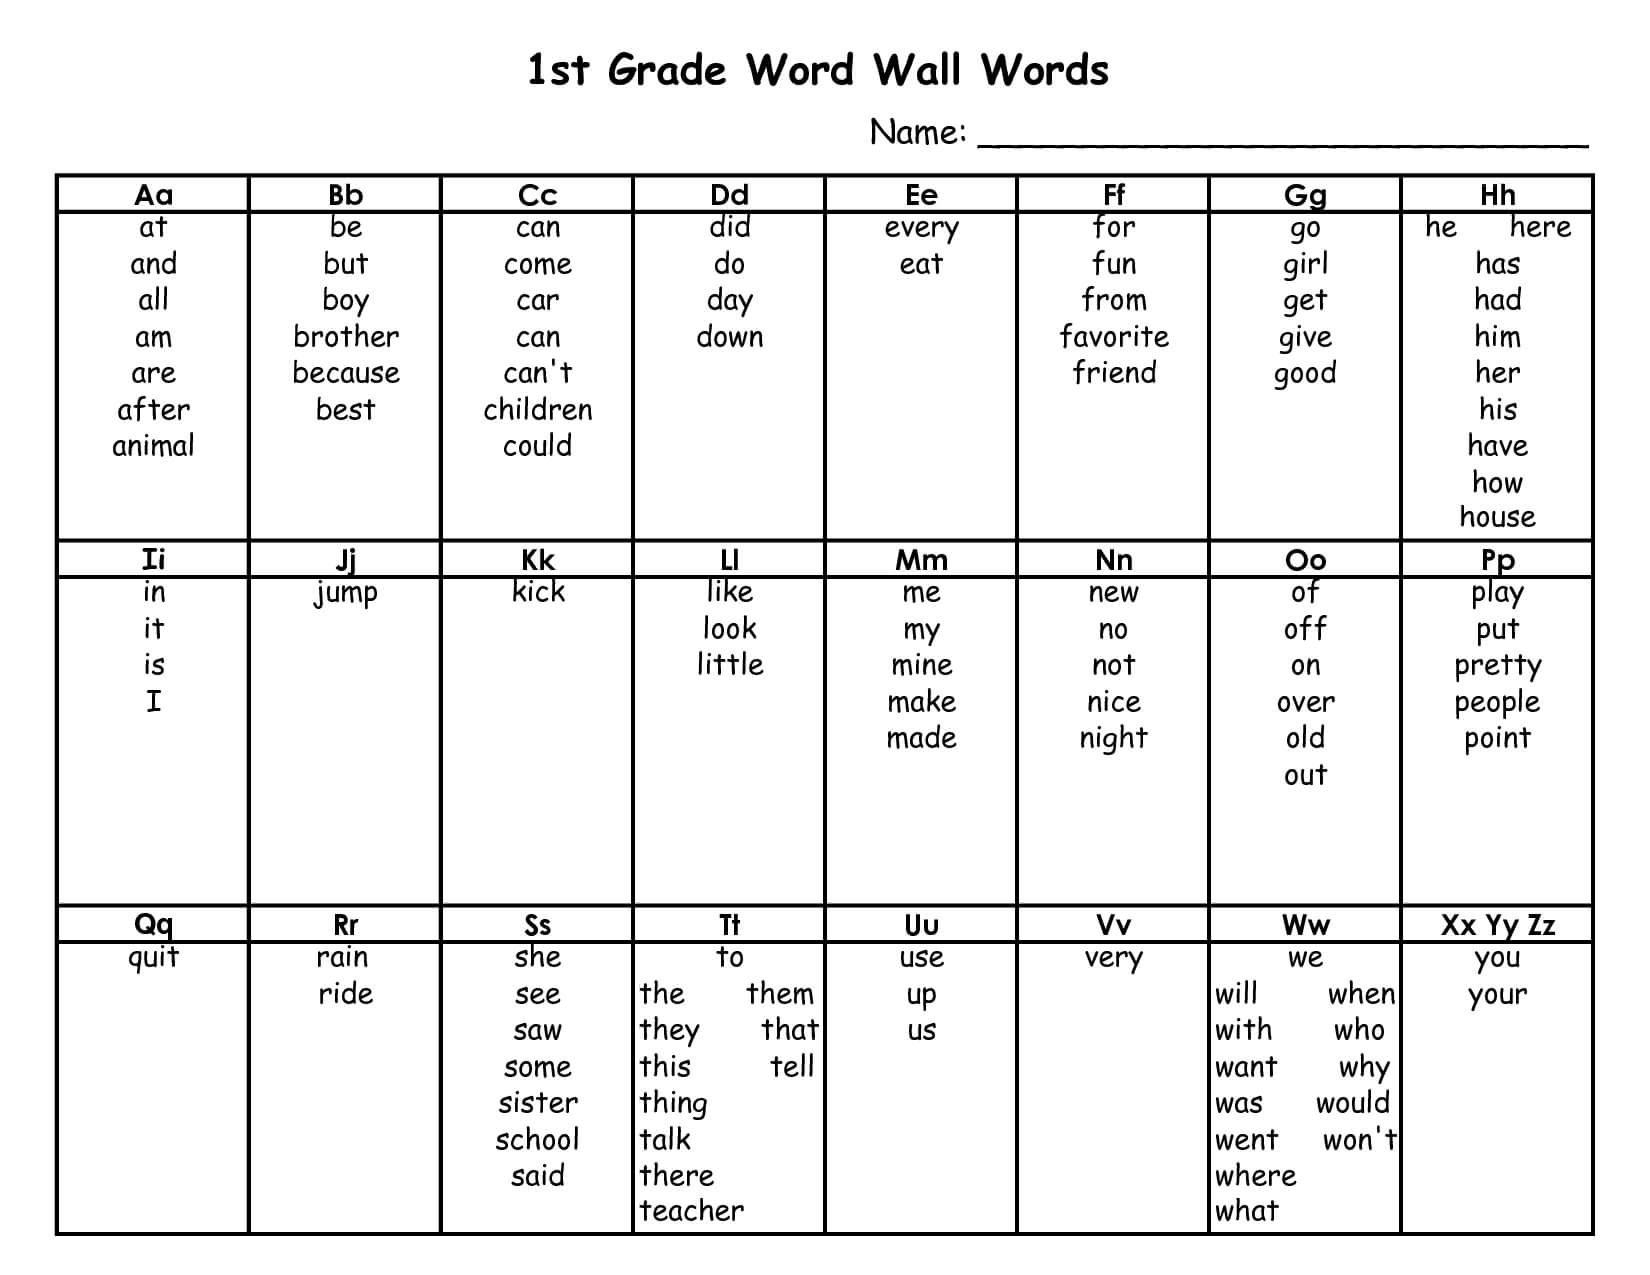 Personal Word Wall Template | First Grade Words, Sight Word Intended For Personal Word Wall Template